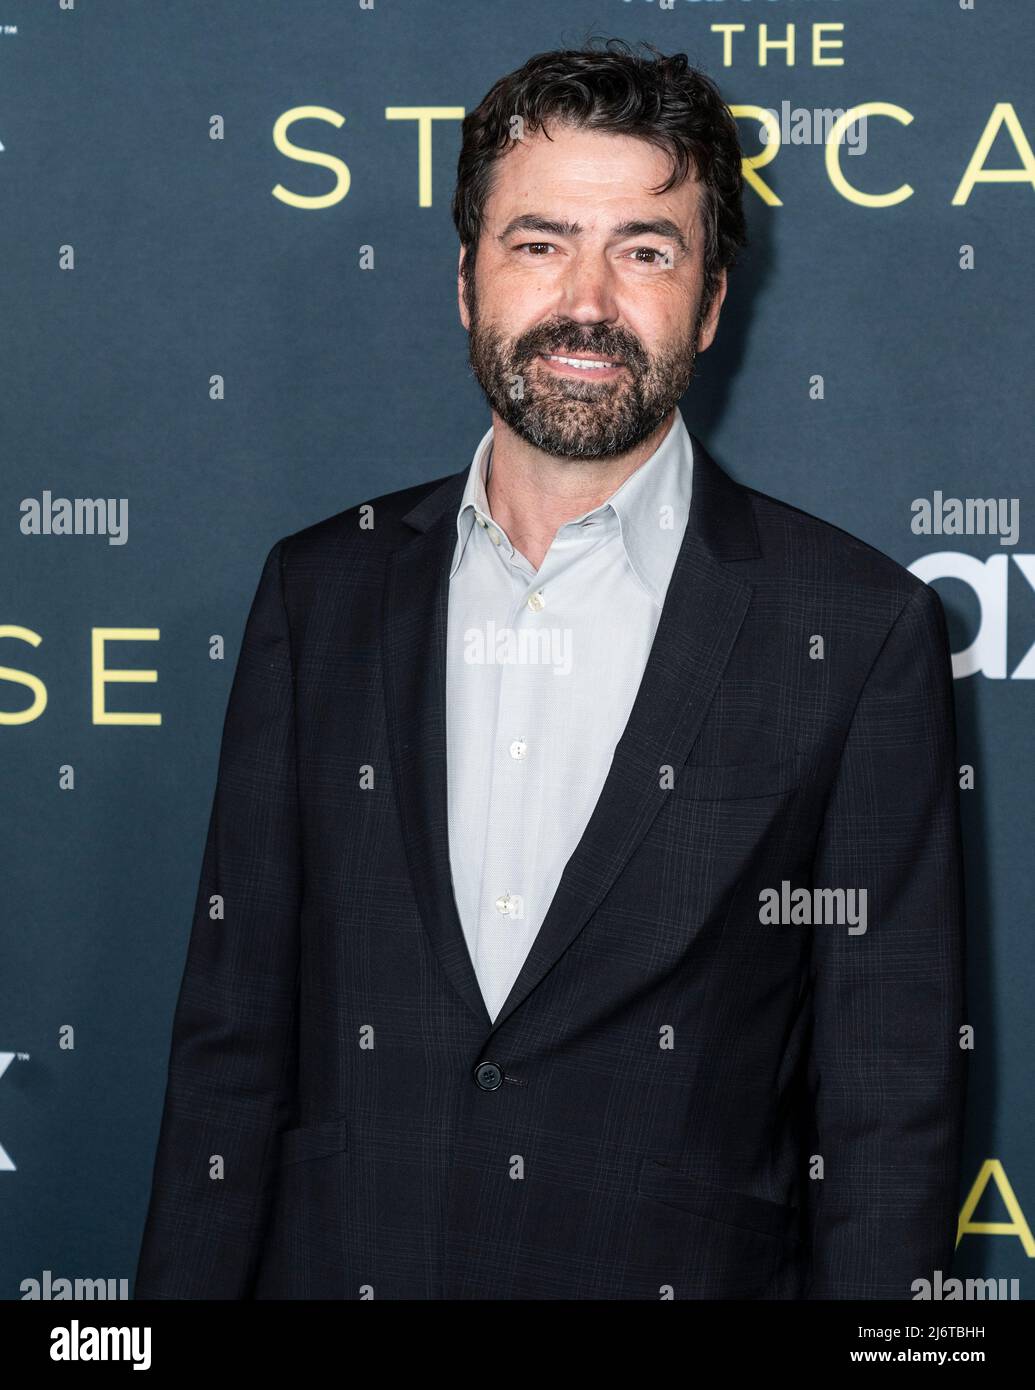 New York, NY - May 3, 2022: Ron Livingston attends 'The Staircase' TV show  premiere at MoMA Stock Photo - Alamy